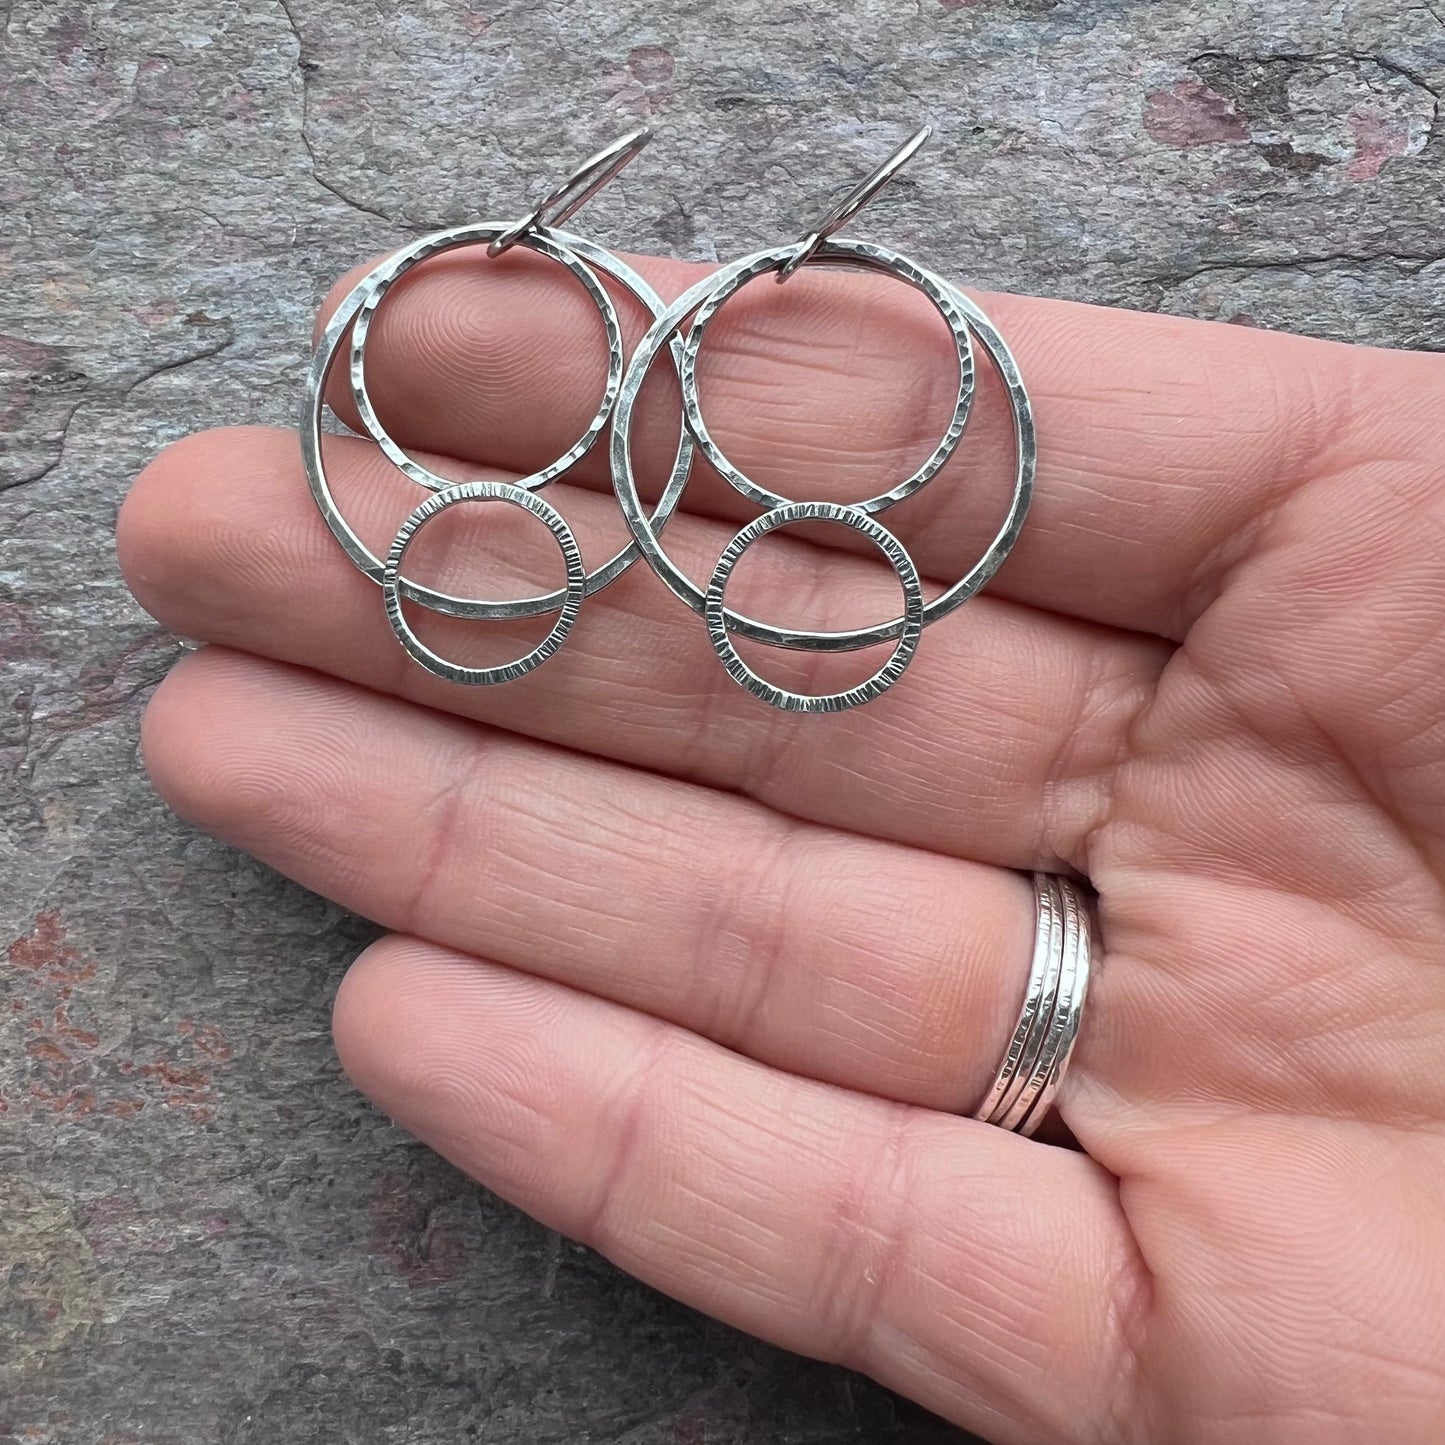 Sterling Silver Overlapping Circles Earrings - Hammered Sterling Silver Rings on Handmade Sterling Silver Earwires